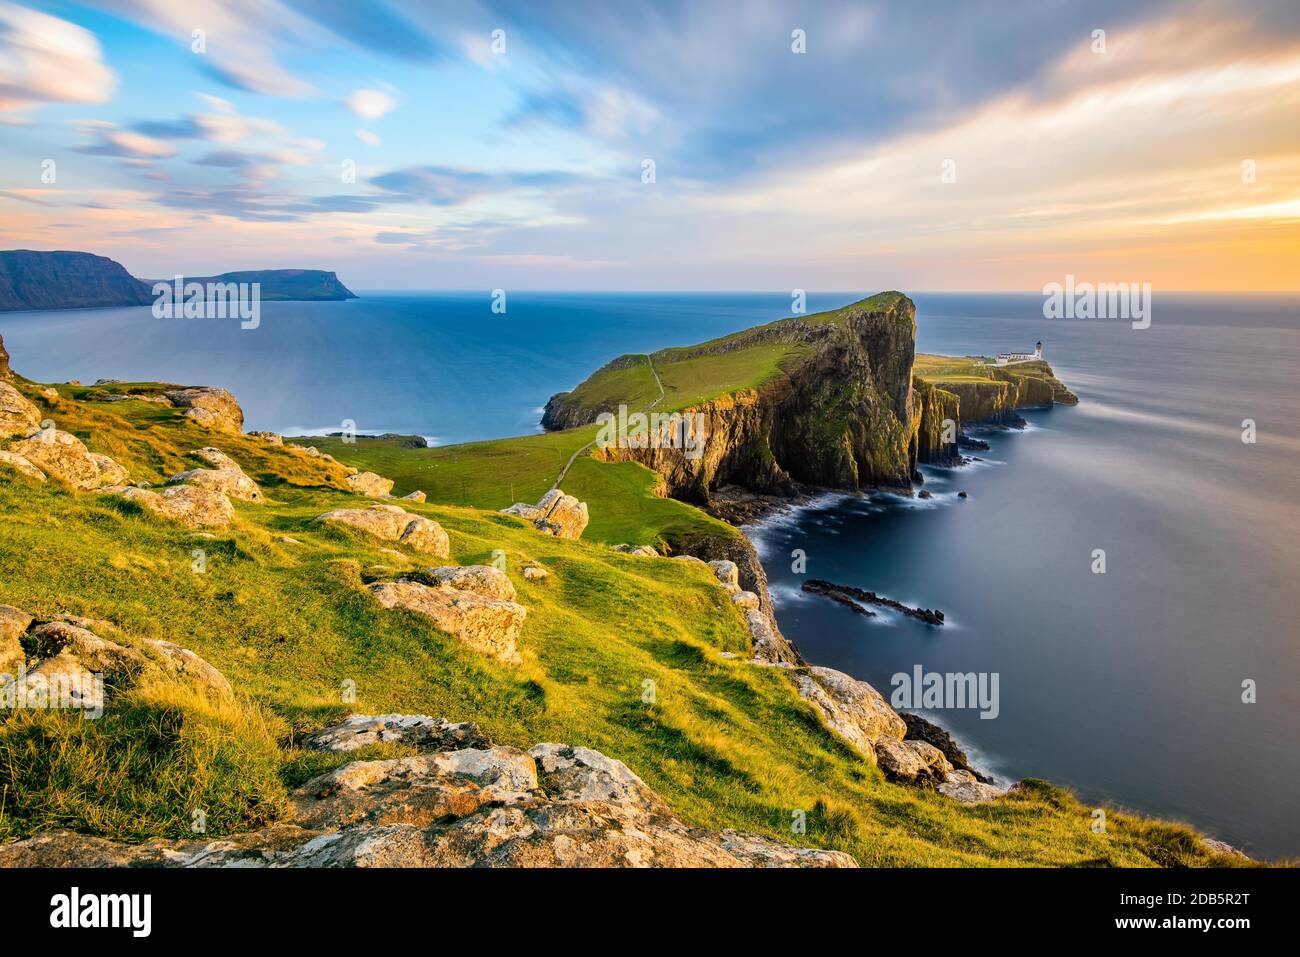 Neist Point Lighthouse on the Isle of Skye bathed in golden light from the setting sun. Stock Photo